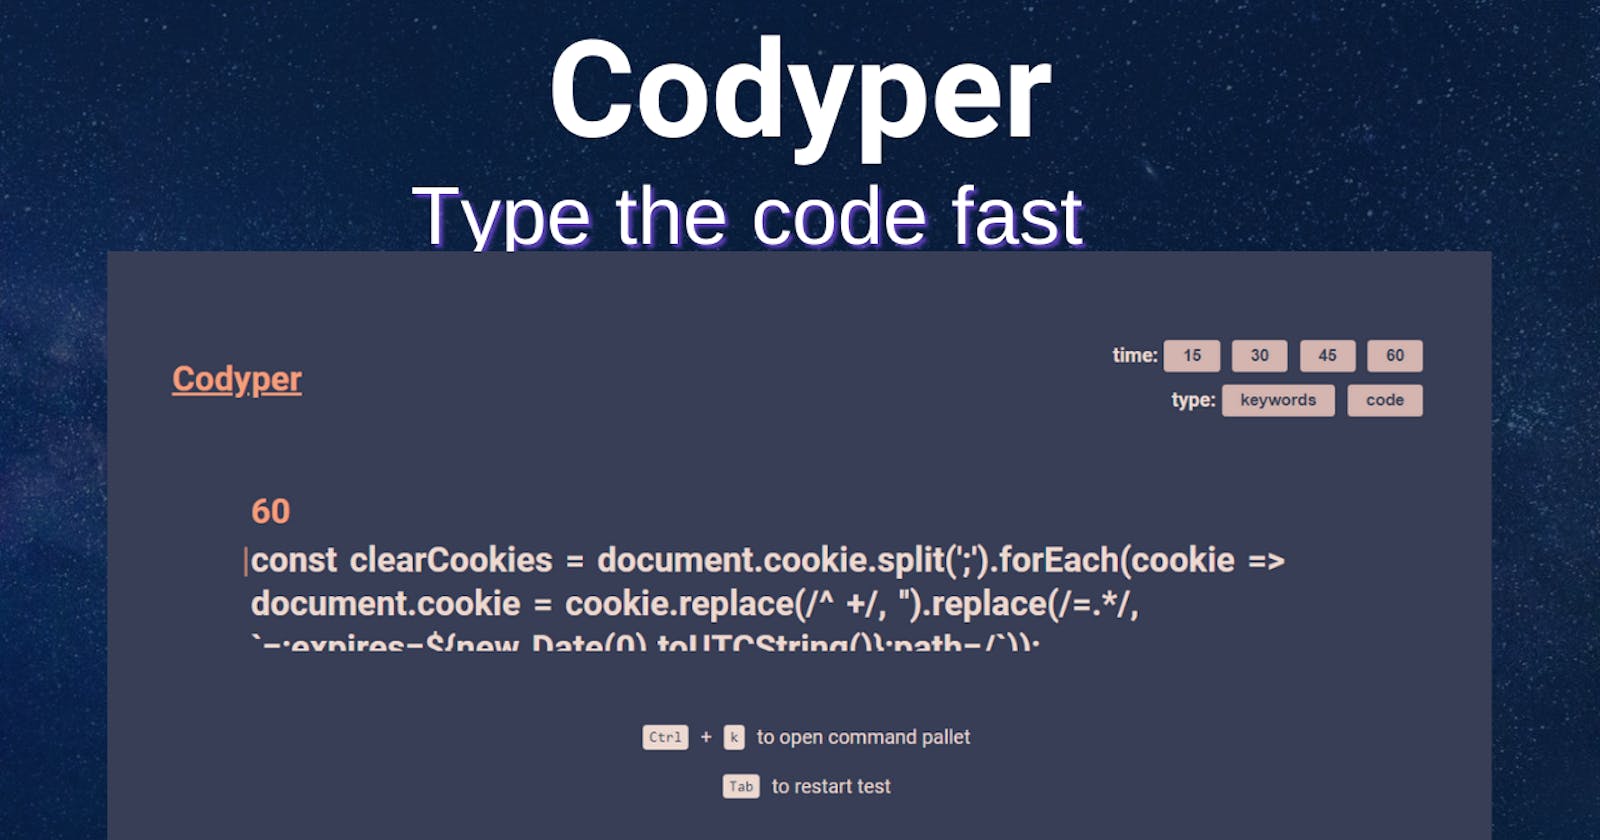 Introducing Codyper - learn to code and increase typing speed at once